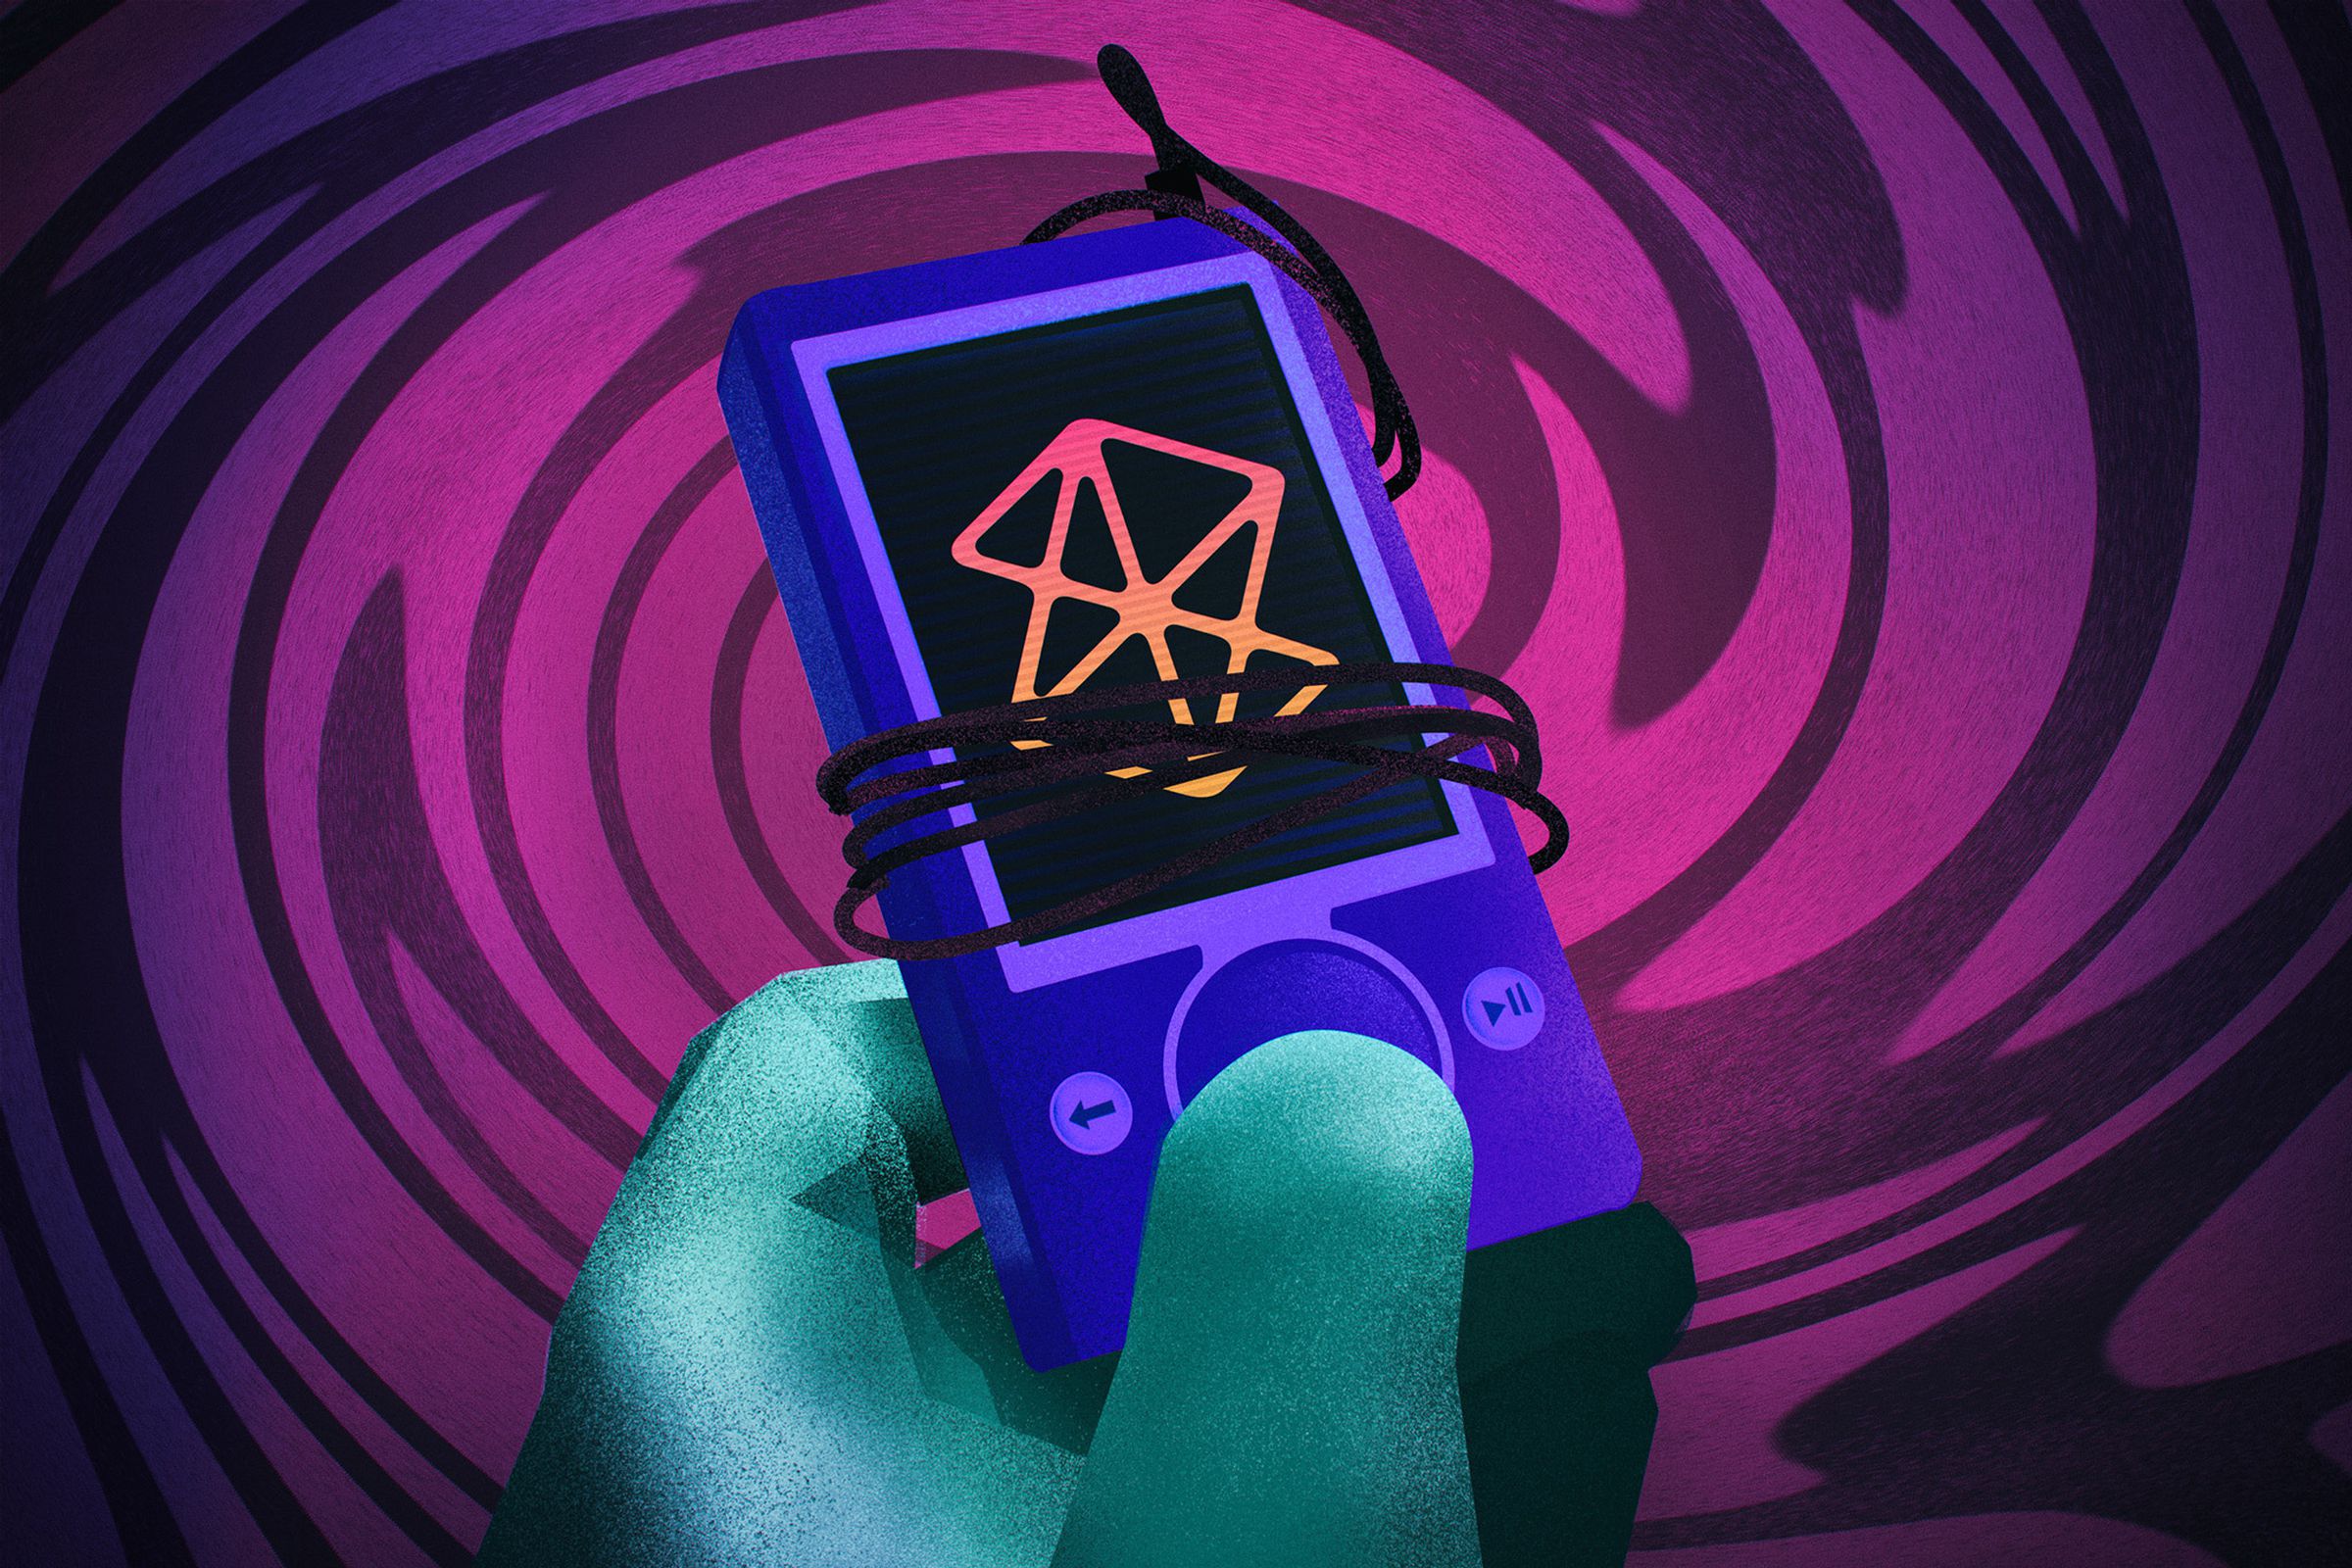 illustration of a Zune with a cable wrapped around it and purple hues